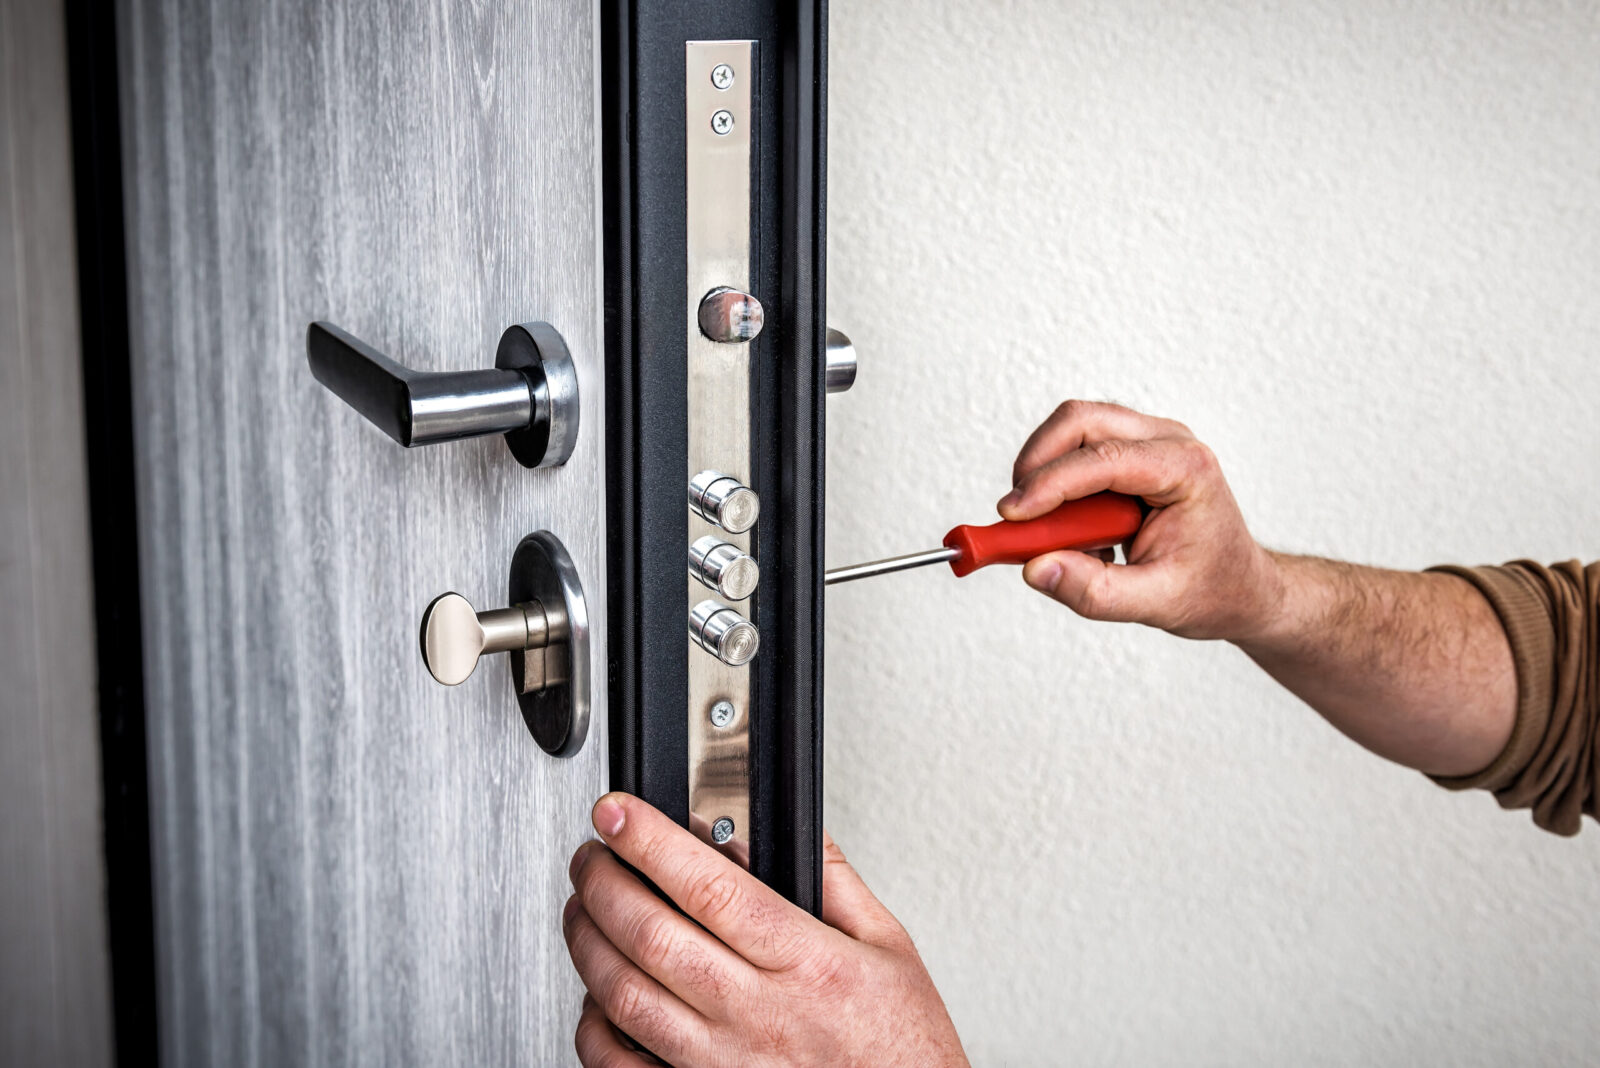 Locksmith Services in Chapel Hill, Raleigh